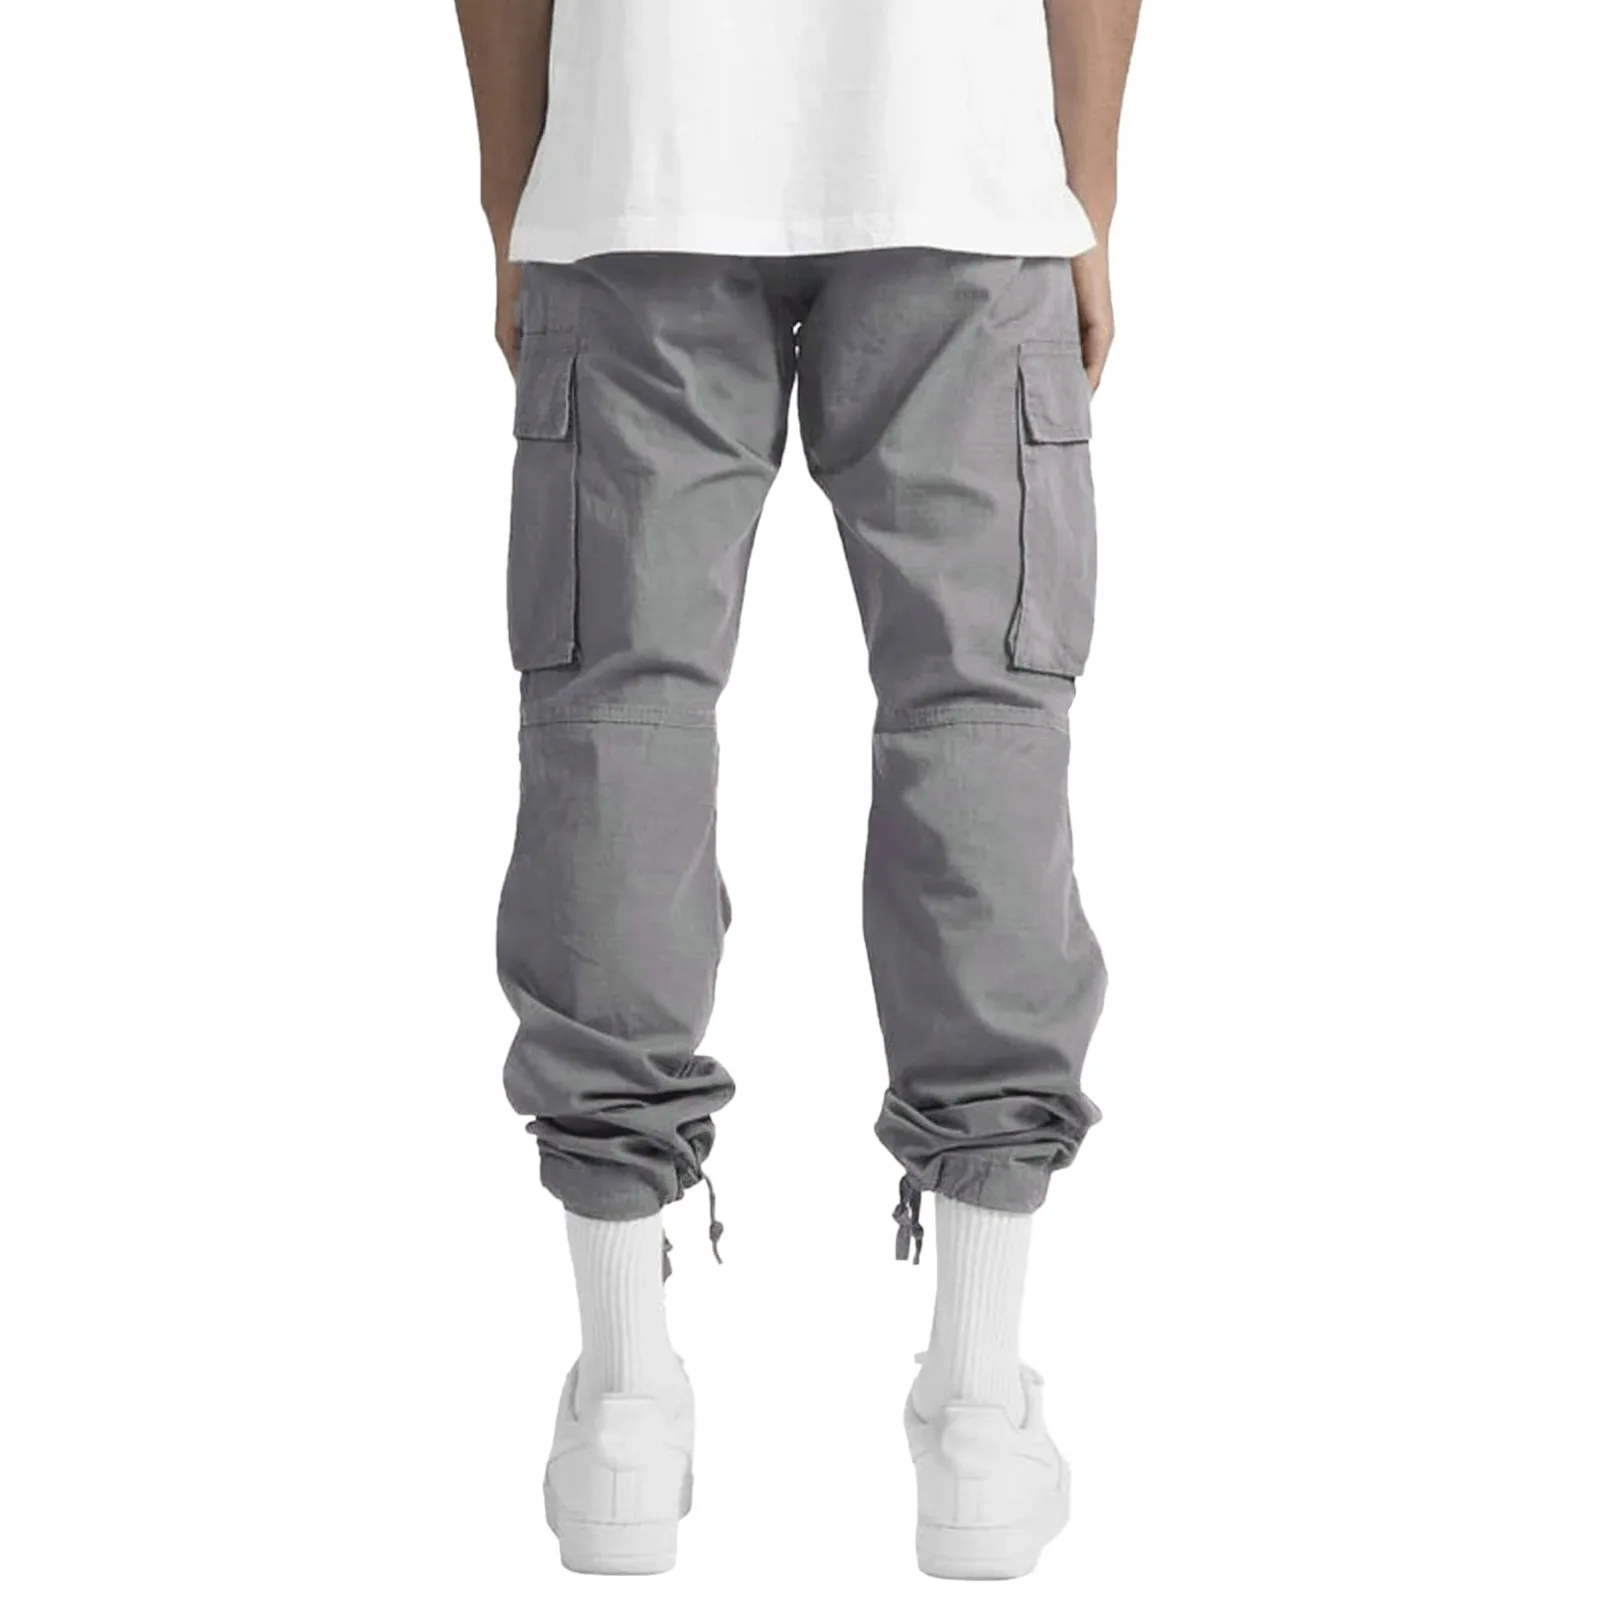 Mens Cargo Pants With Side Pockets Fashion Trousers For Men Regular Fit ...